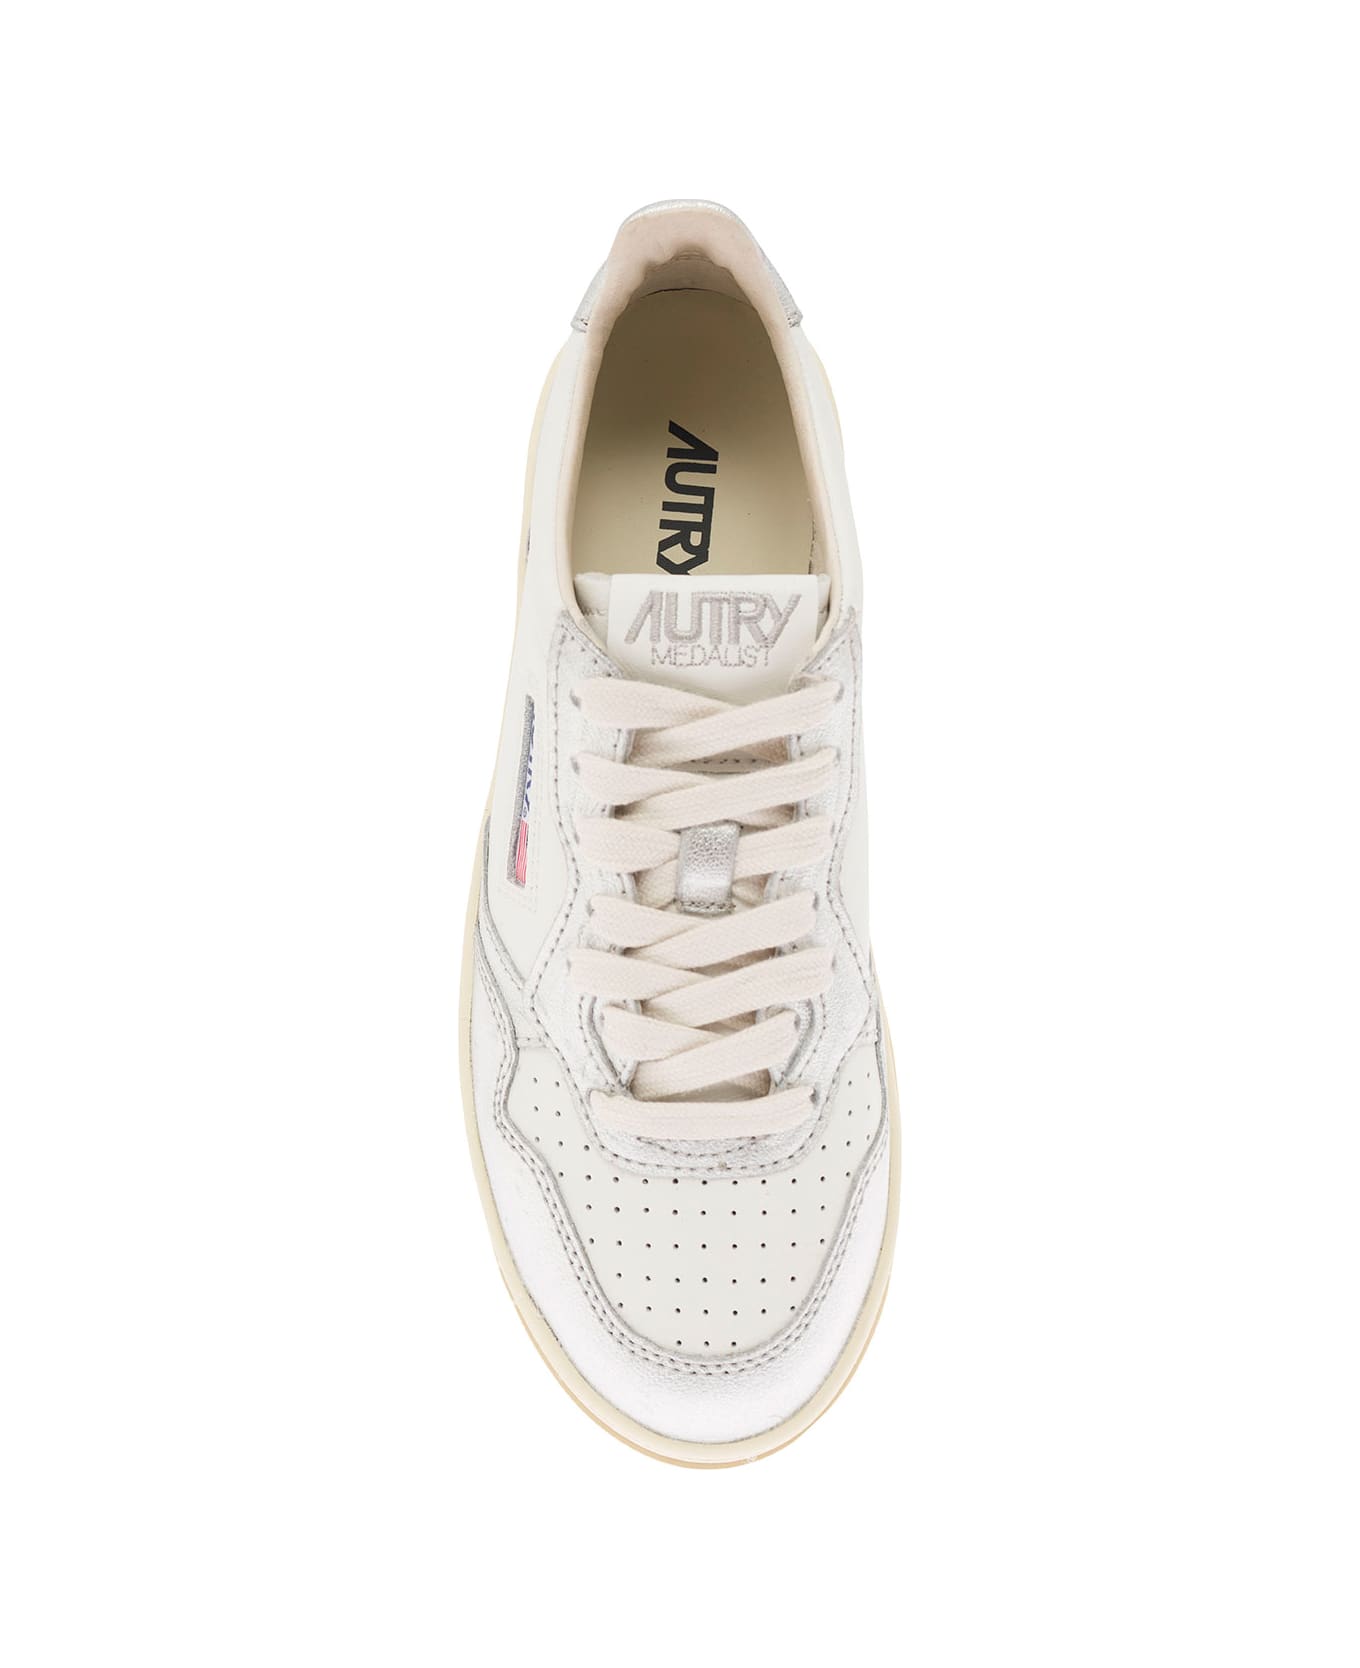 Autry White And Silver Low Top Platform Sneakers With Logo In Leather Woman - White ウェッジシューズ